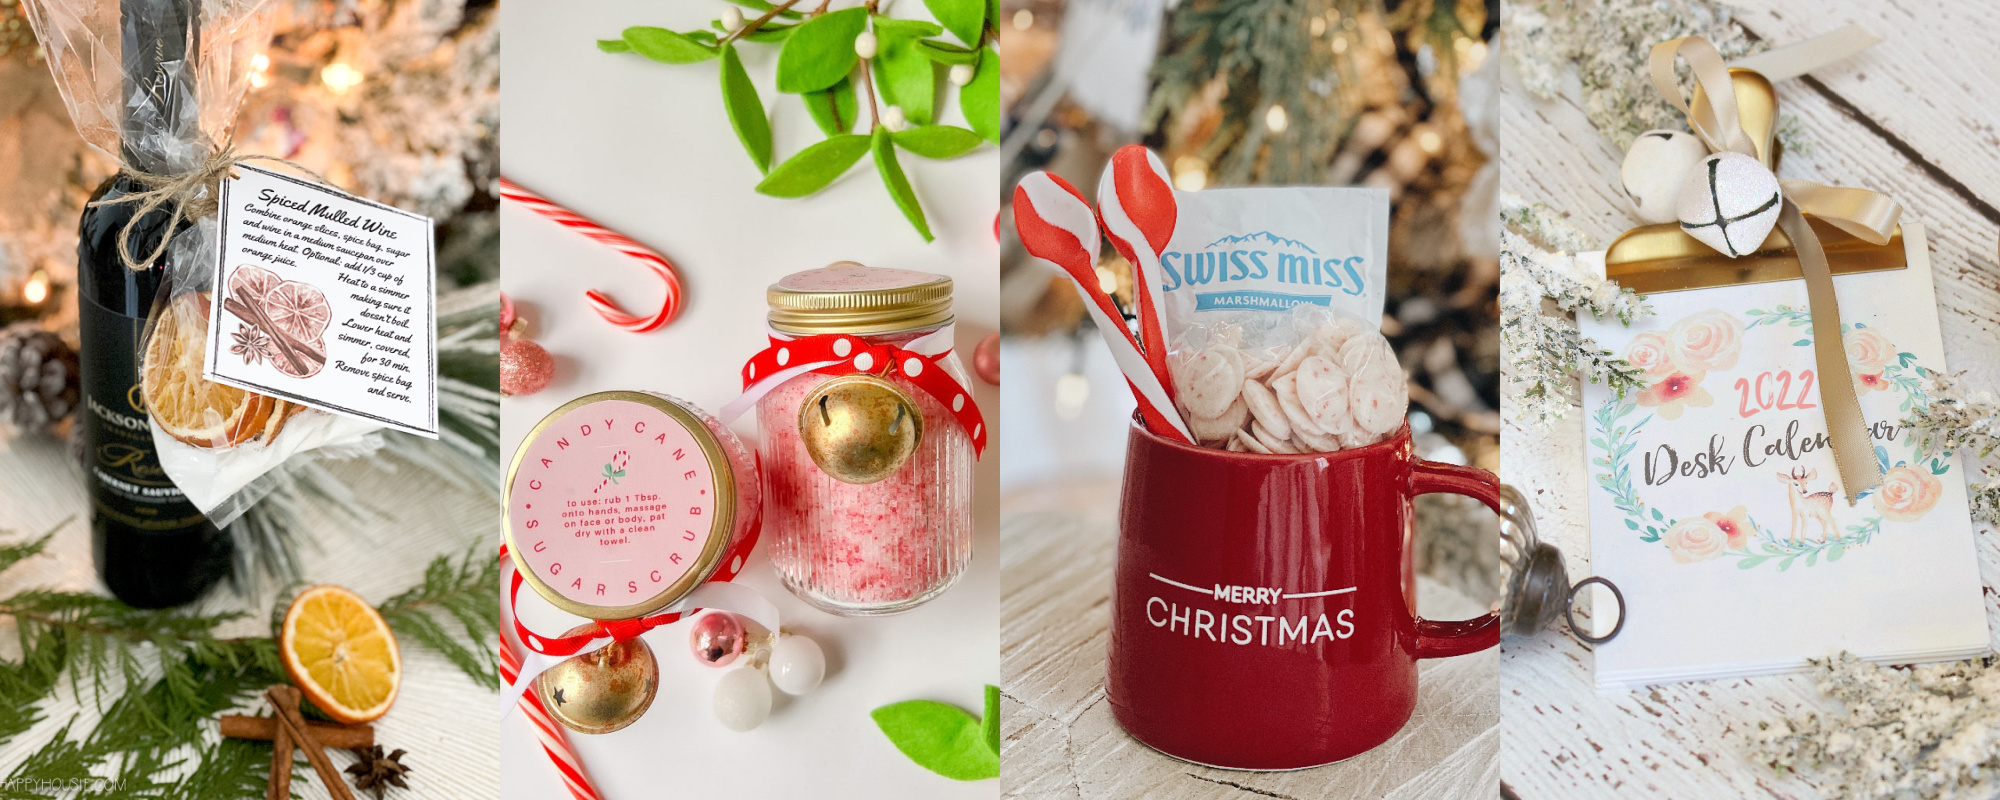 four DIY gift ideas for the holidays